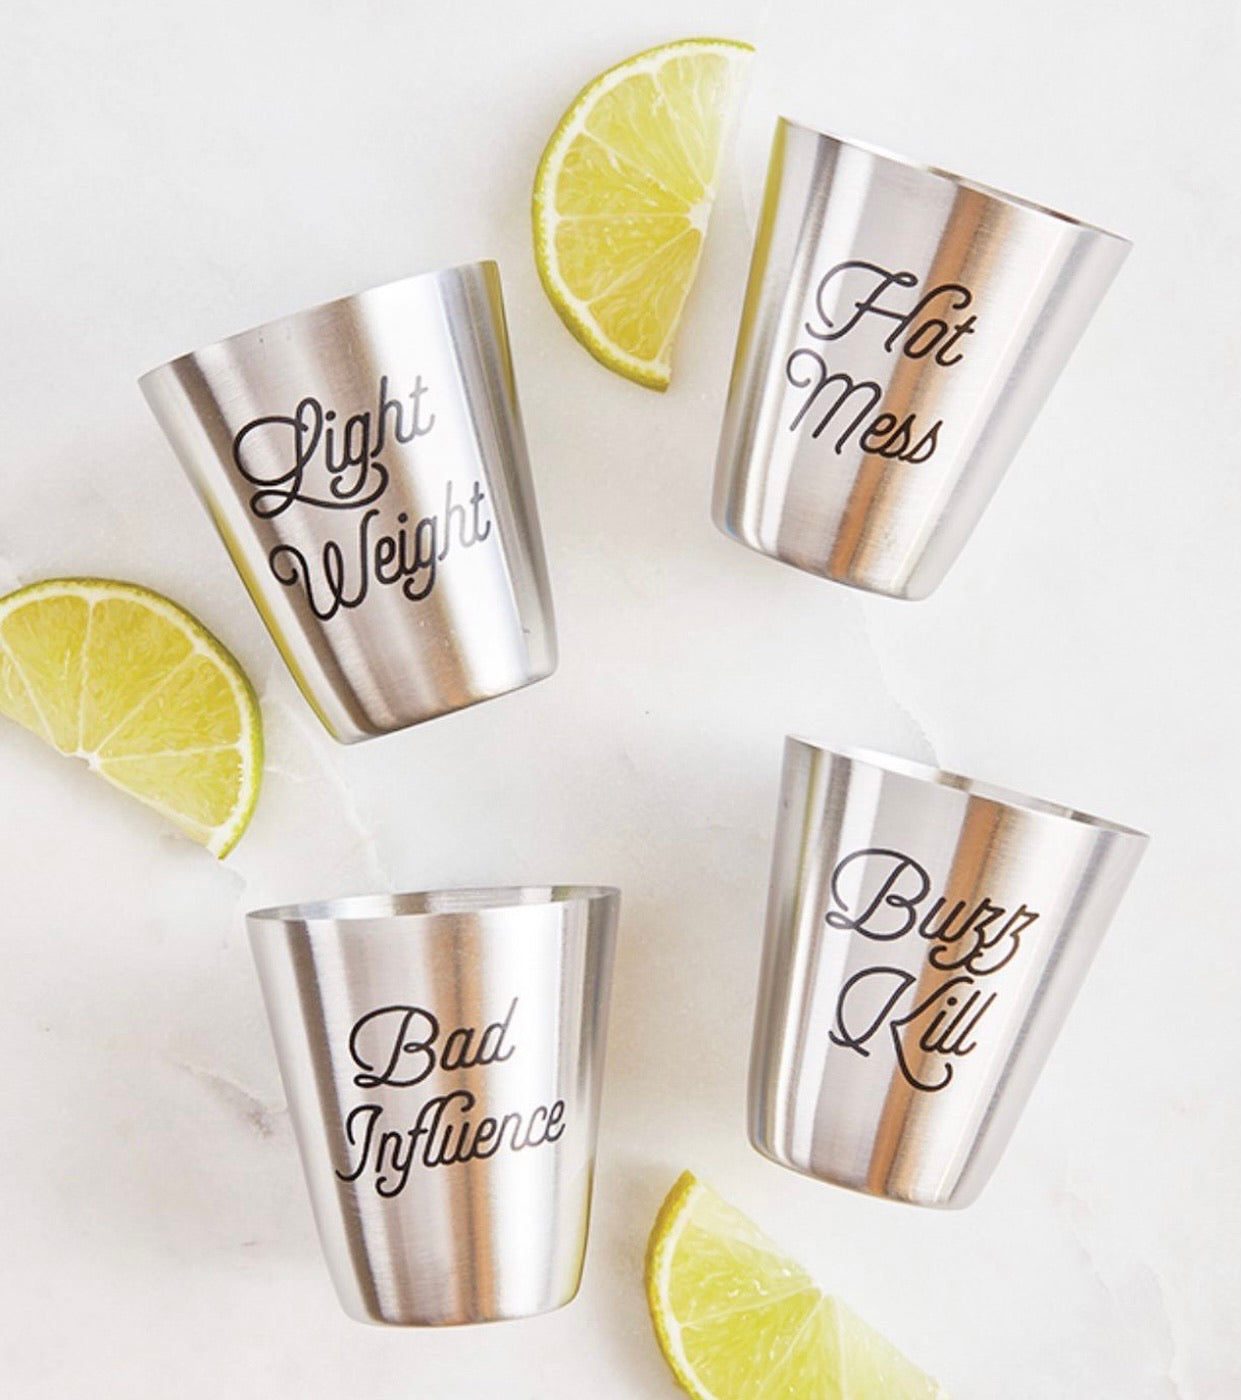 Party Starter - Personality Shot Glasses